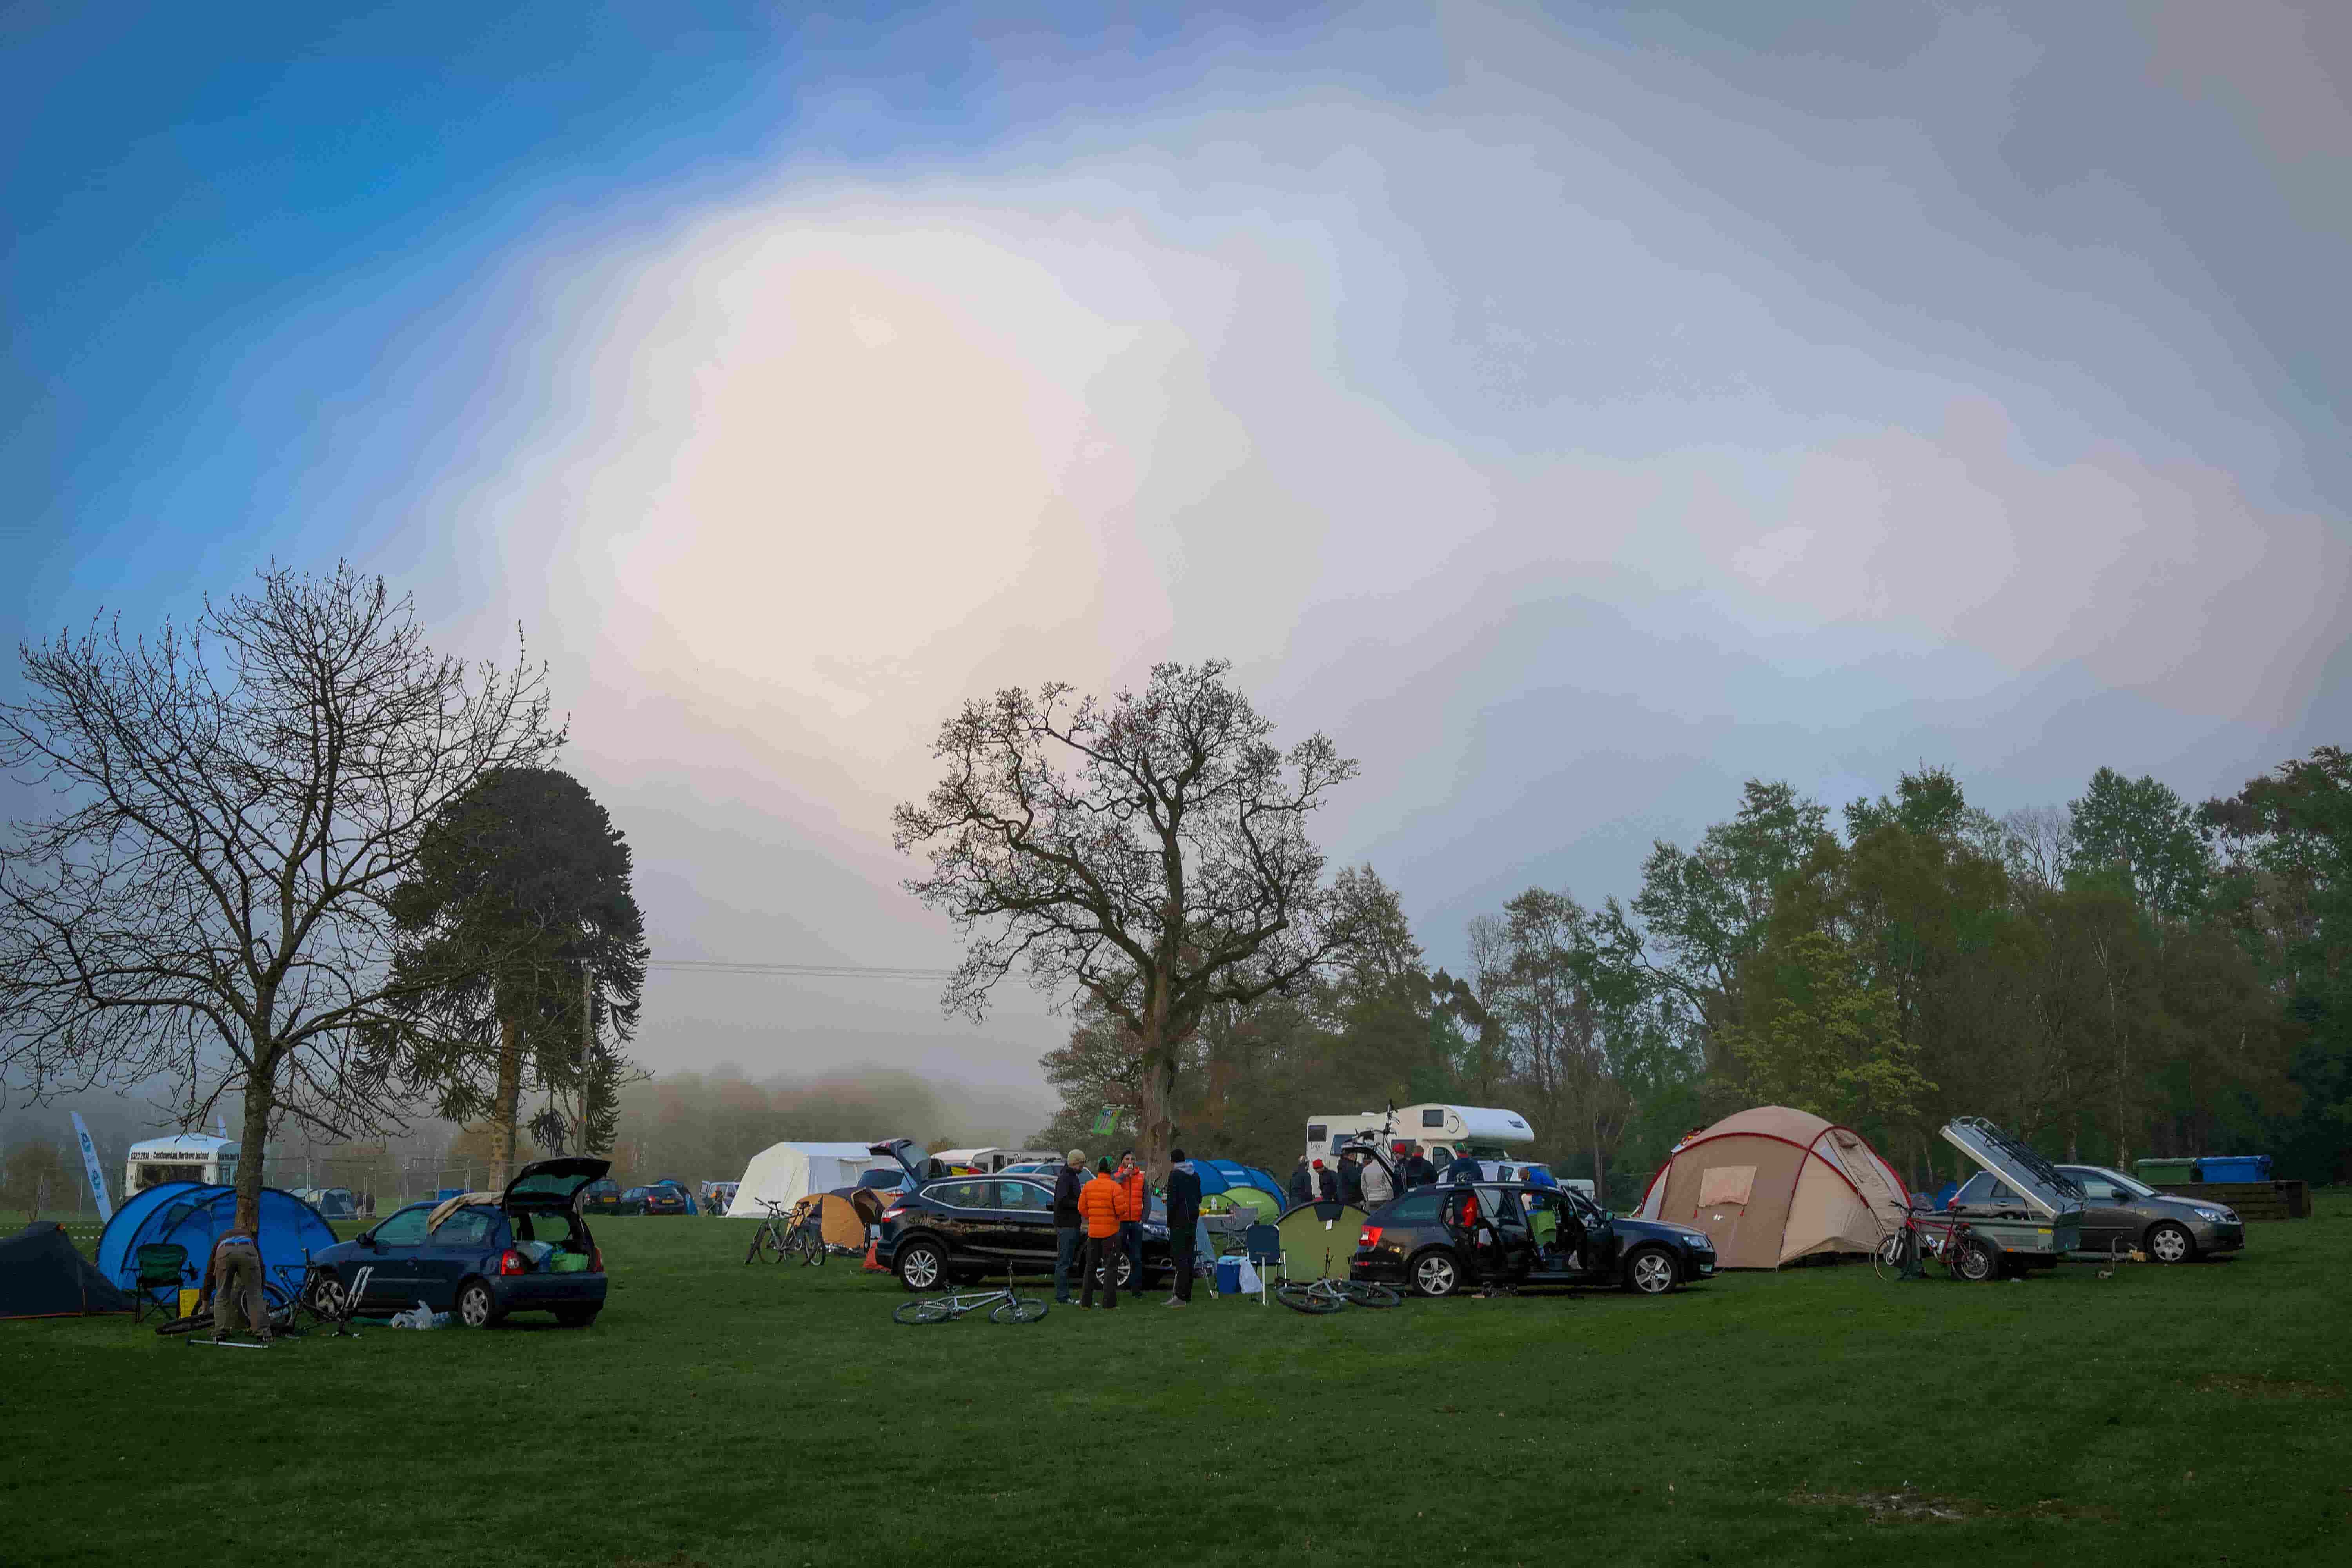 A campsite, with people, tents and cars, in a grass field with trees behind them, and a hazy sun above